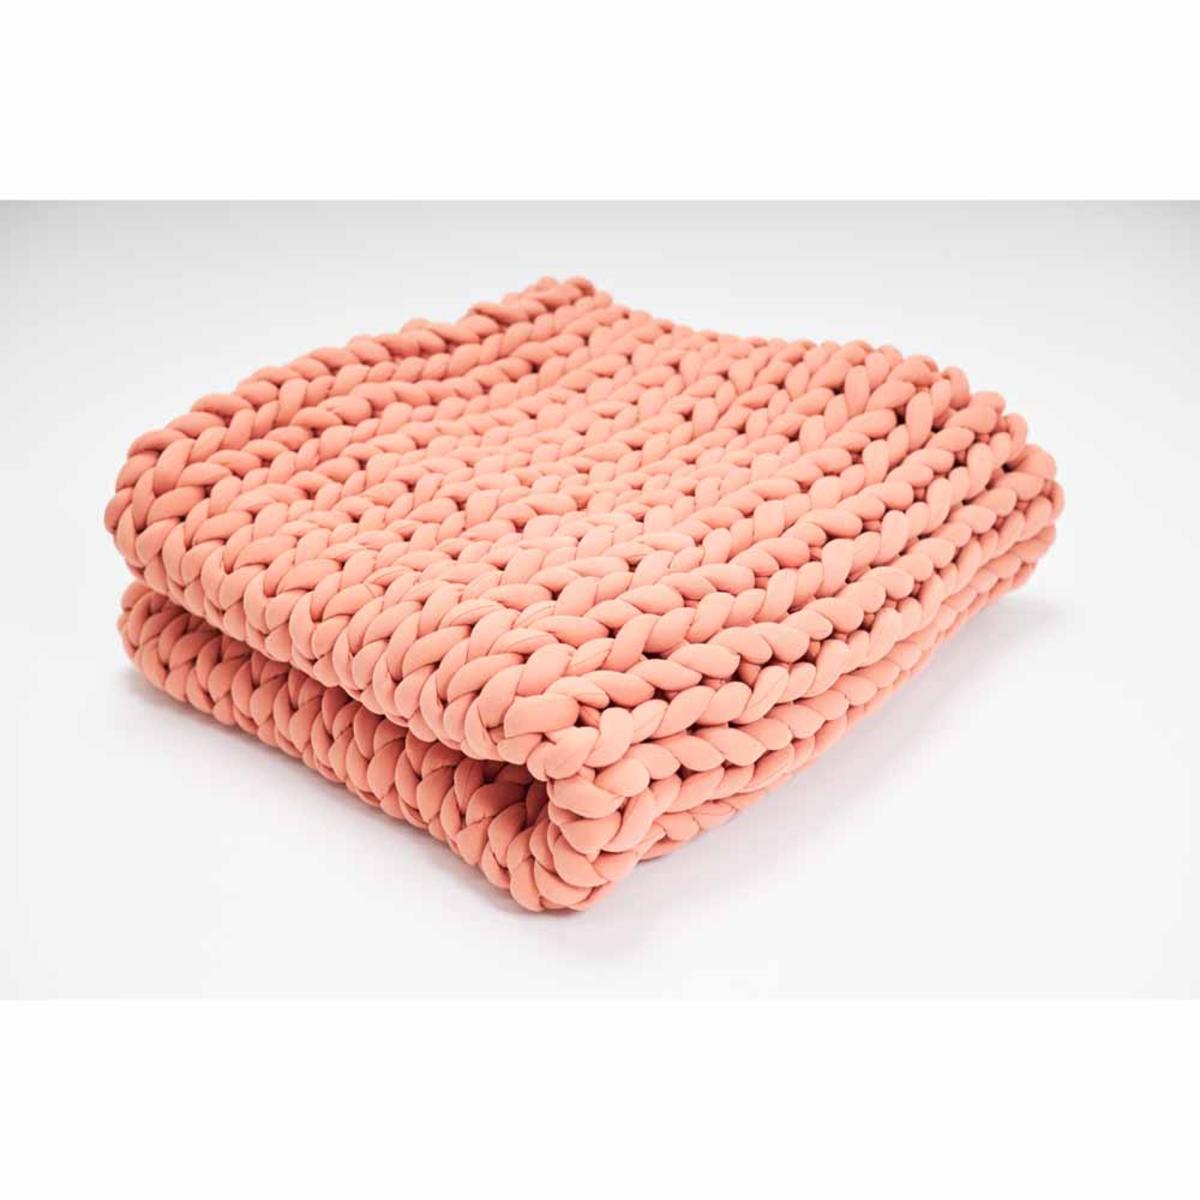 Hush 15lbs Cotton Knitted Weighted Throw Blanket